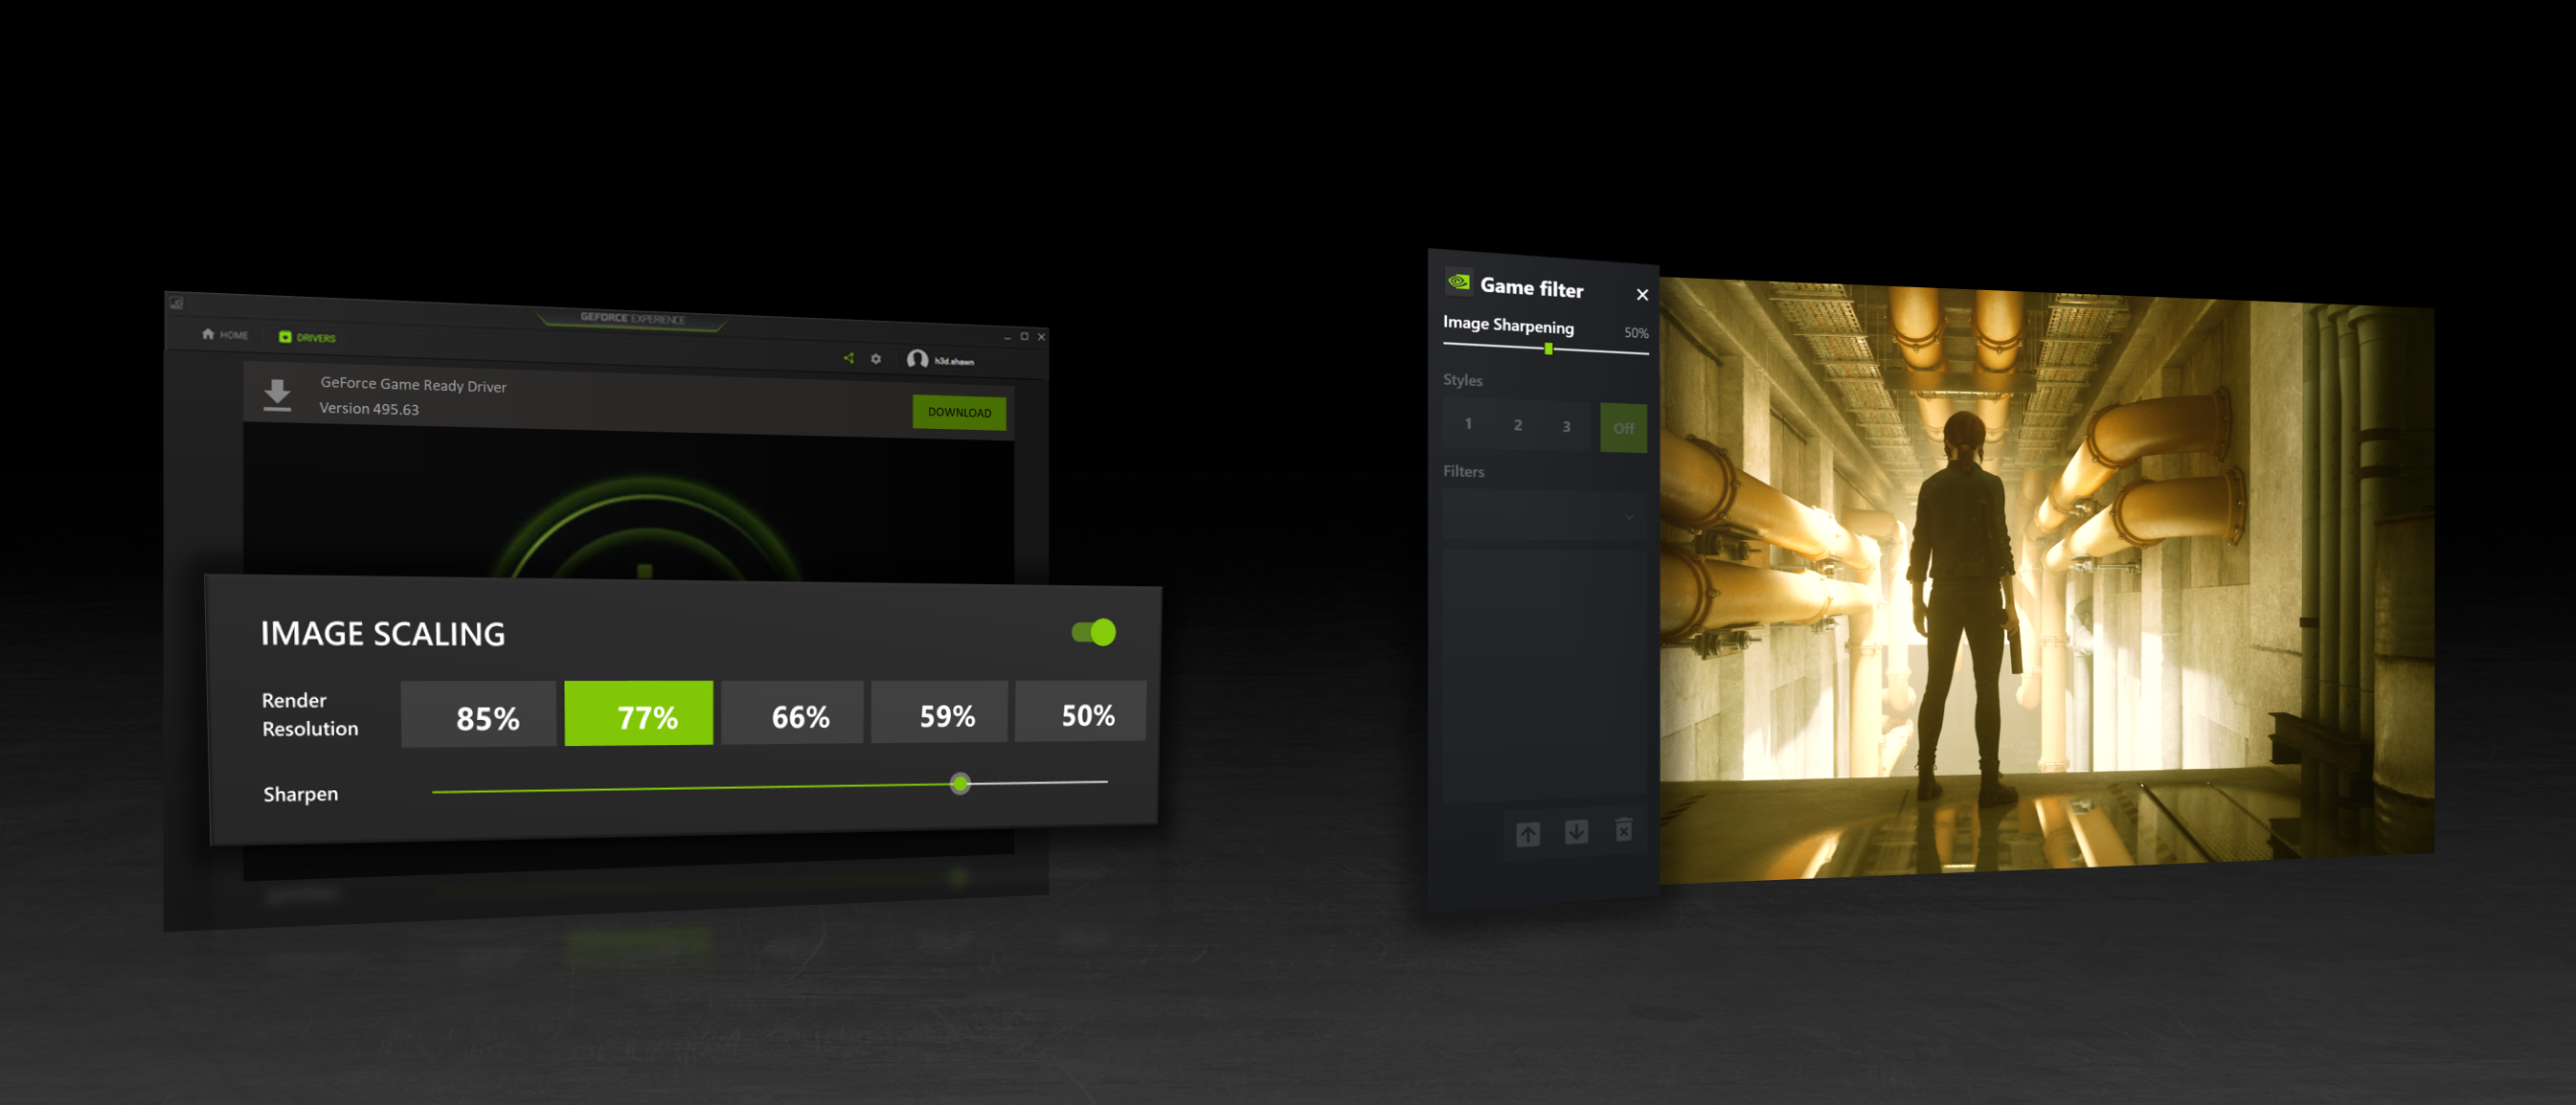 Download GeForce Experience | NVIDIA